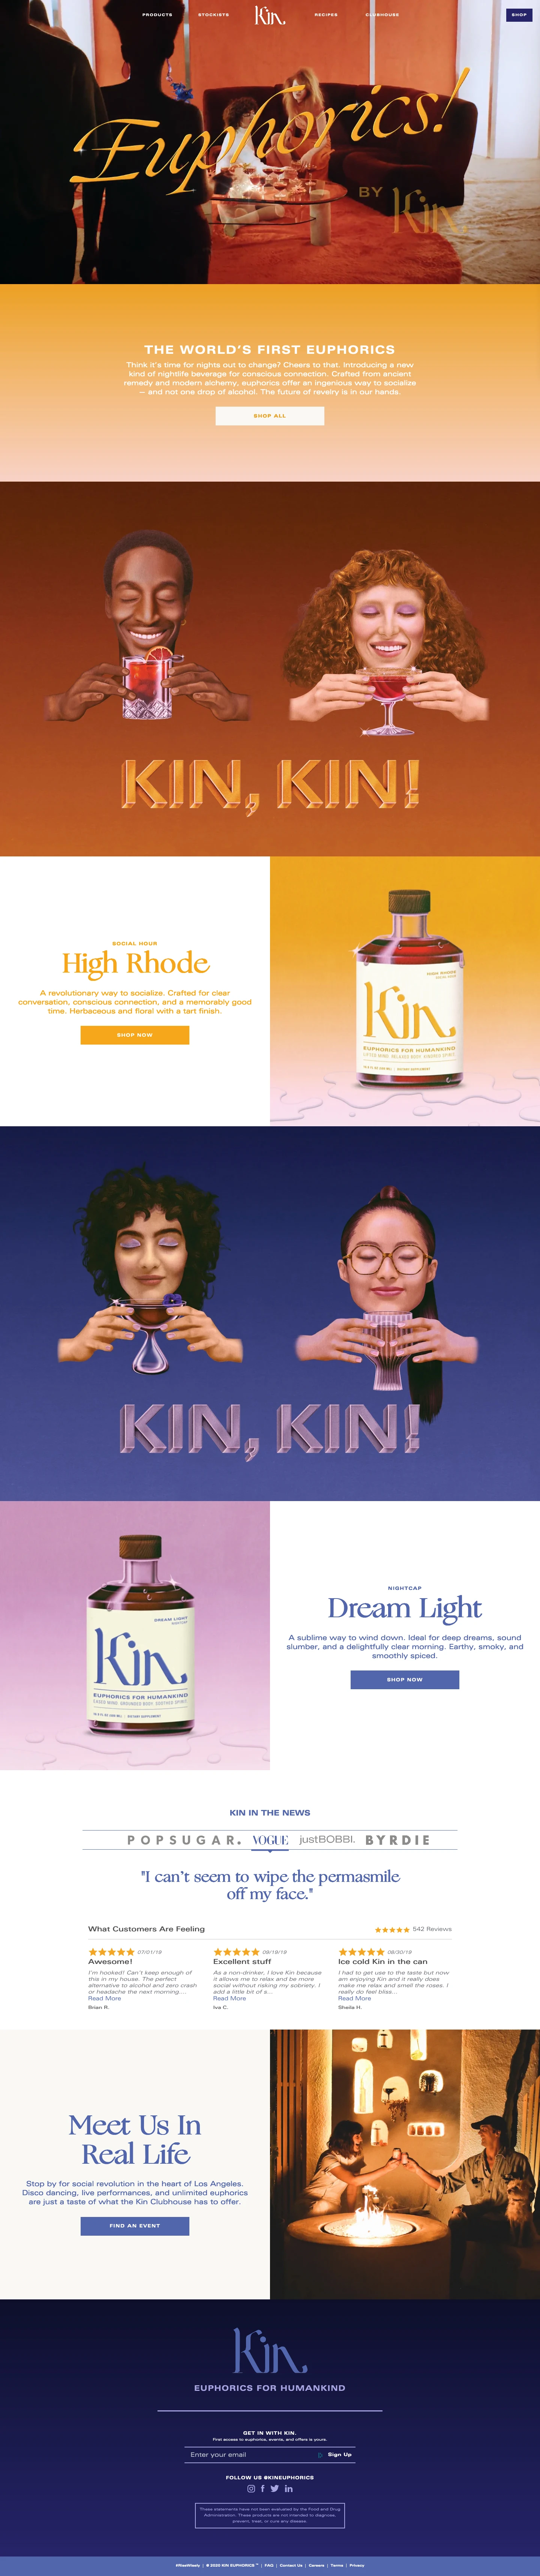 Kin Euphorics Landing Page Example: All bliss, No booze rise into the night and take back our morning afters.